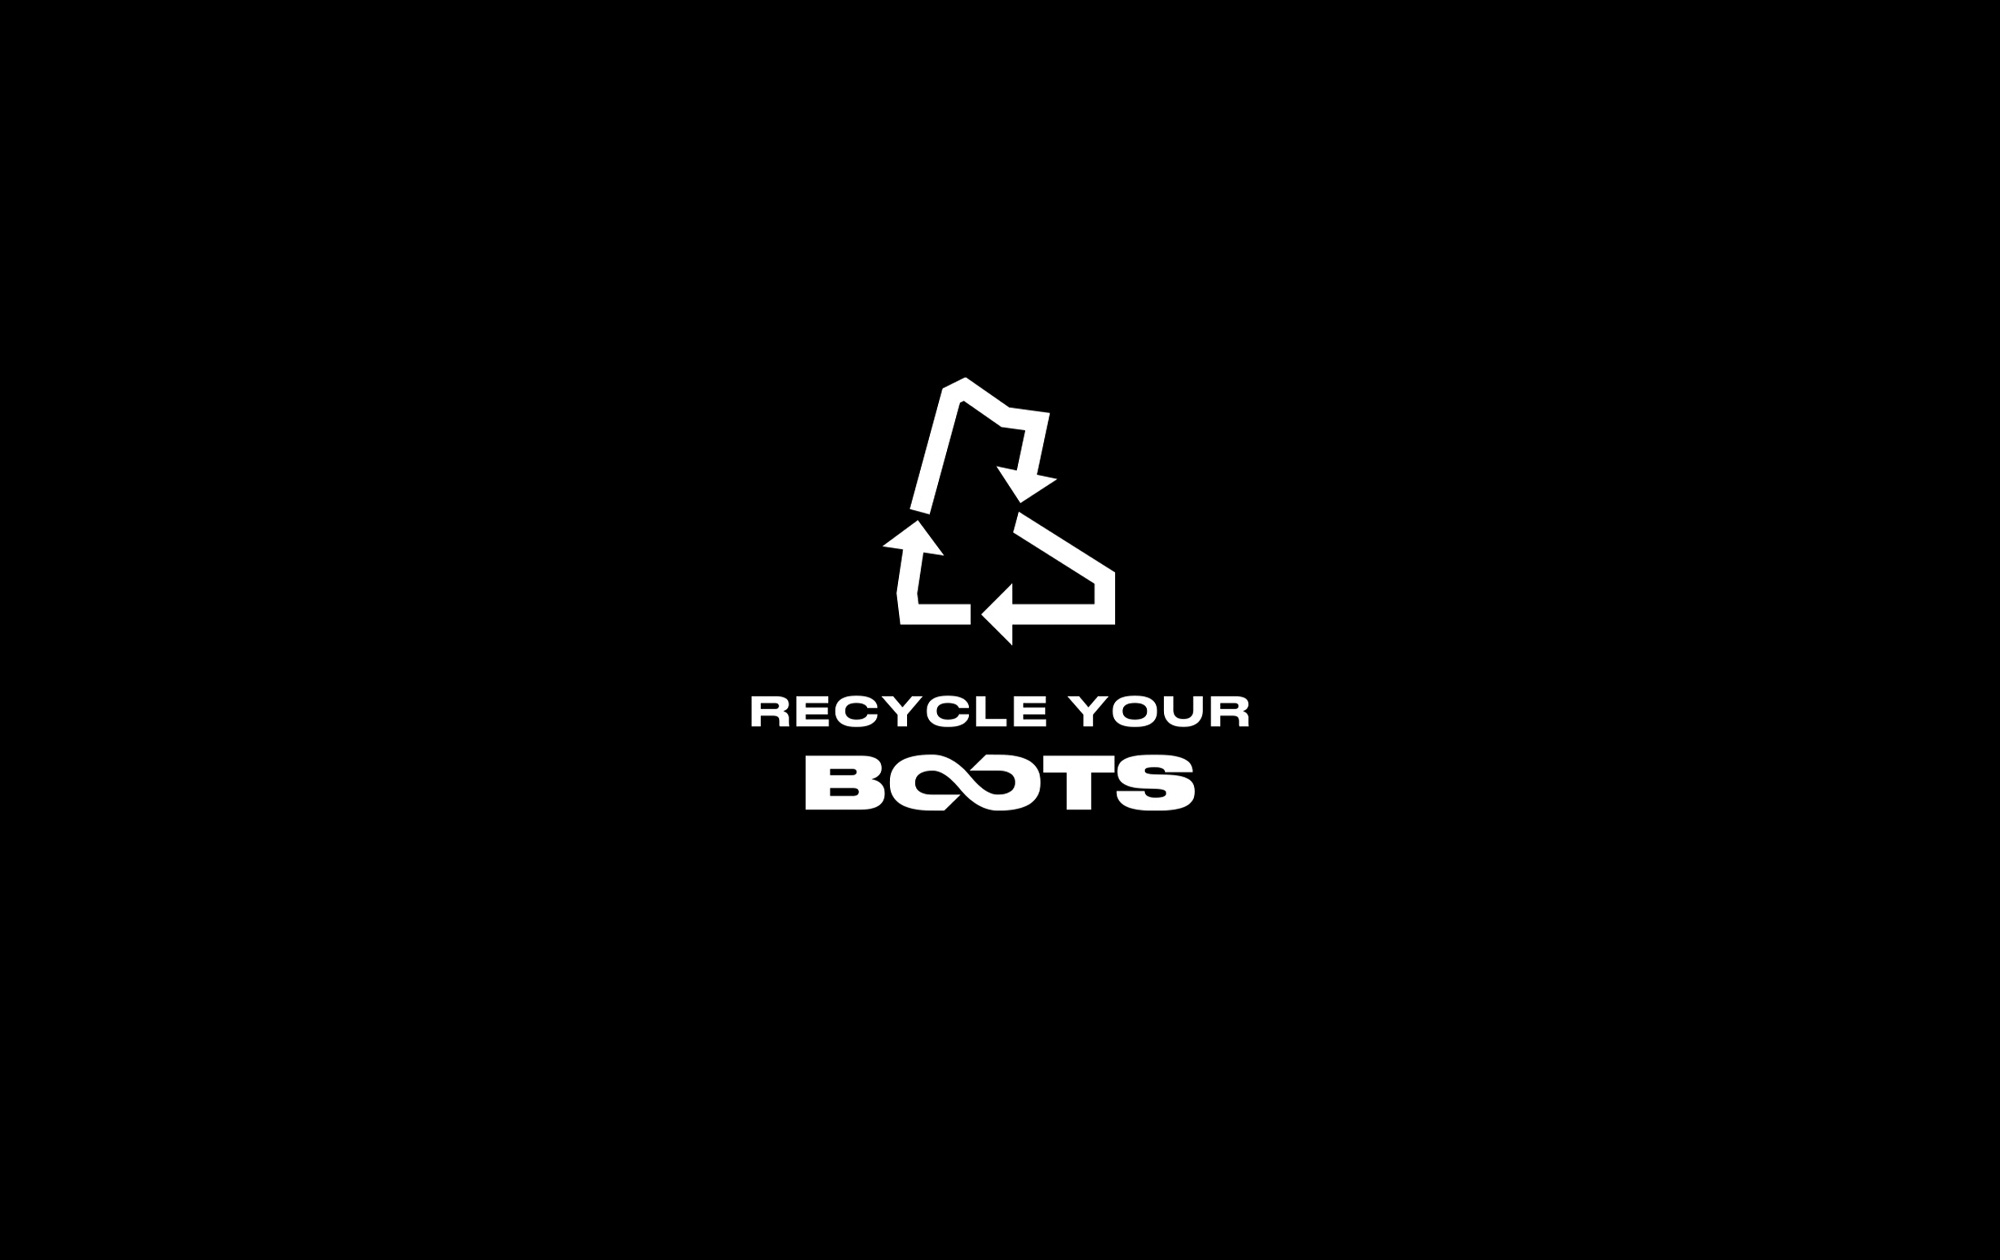 Tecnica & Nordica: Recycle Your Boots; Skischuhe recyceln